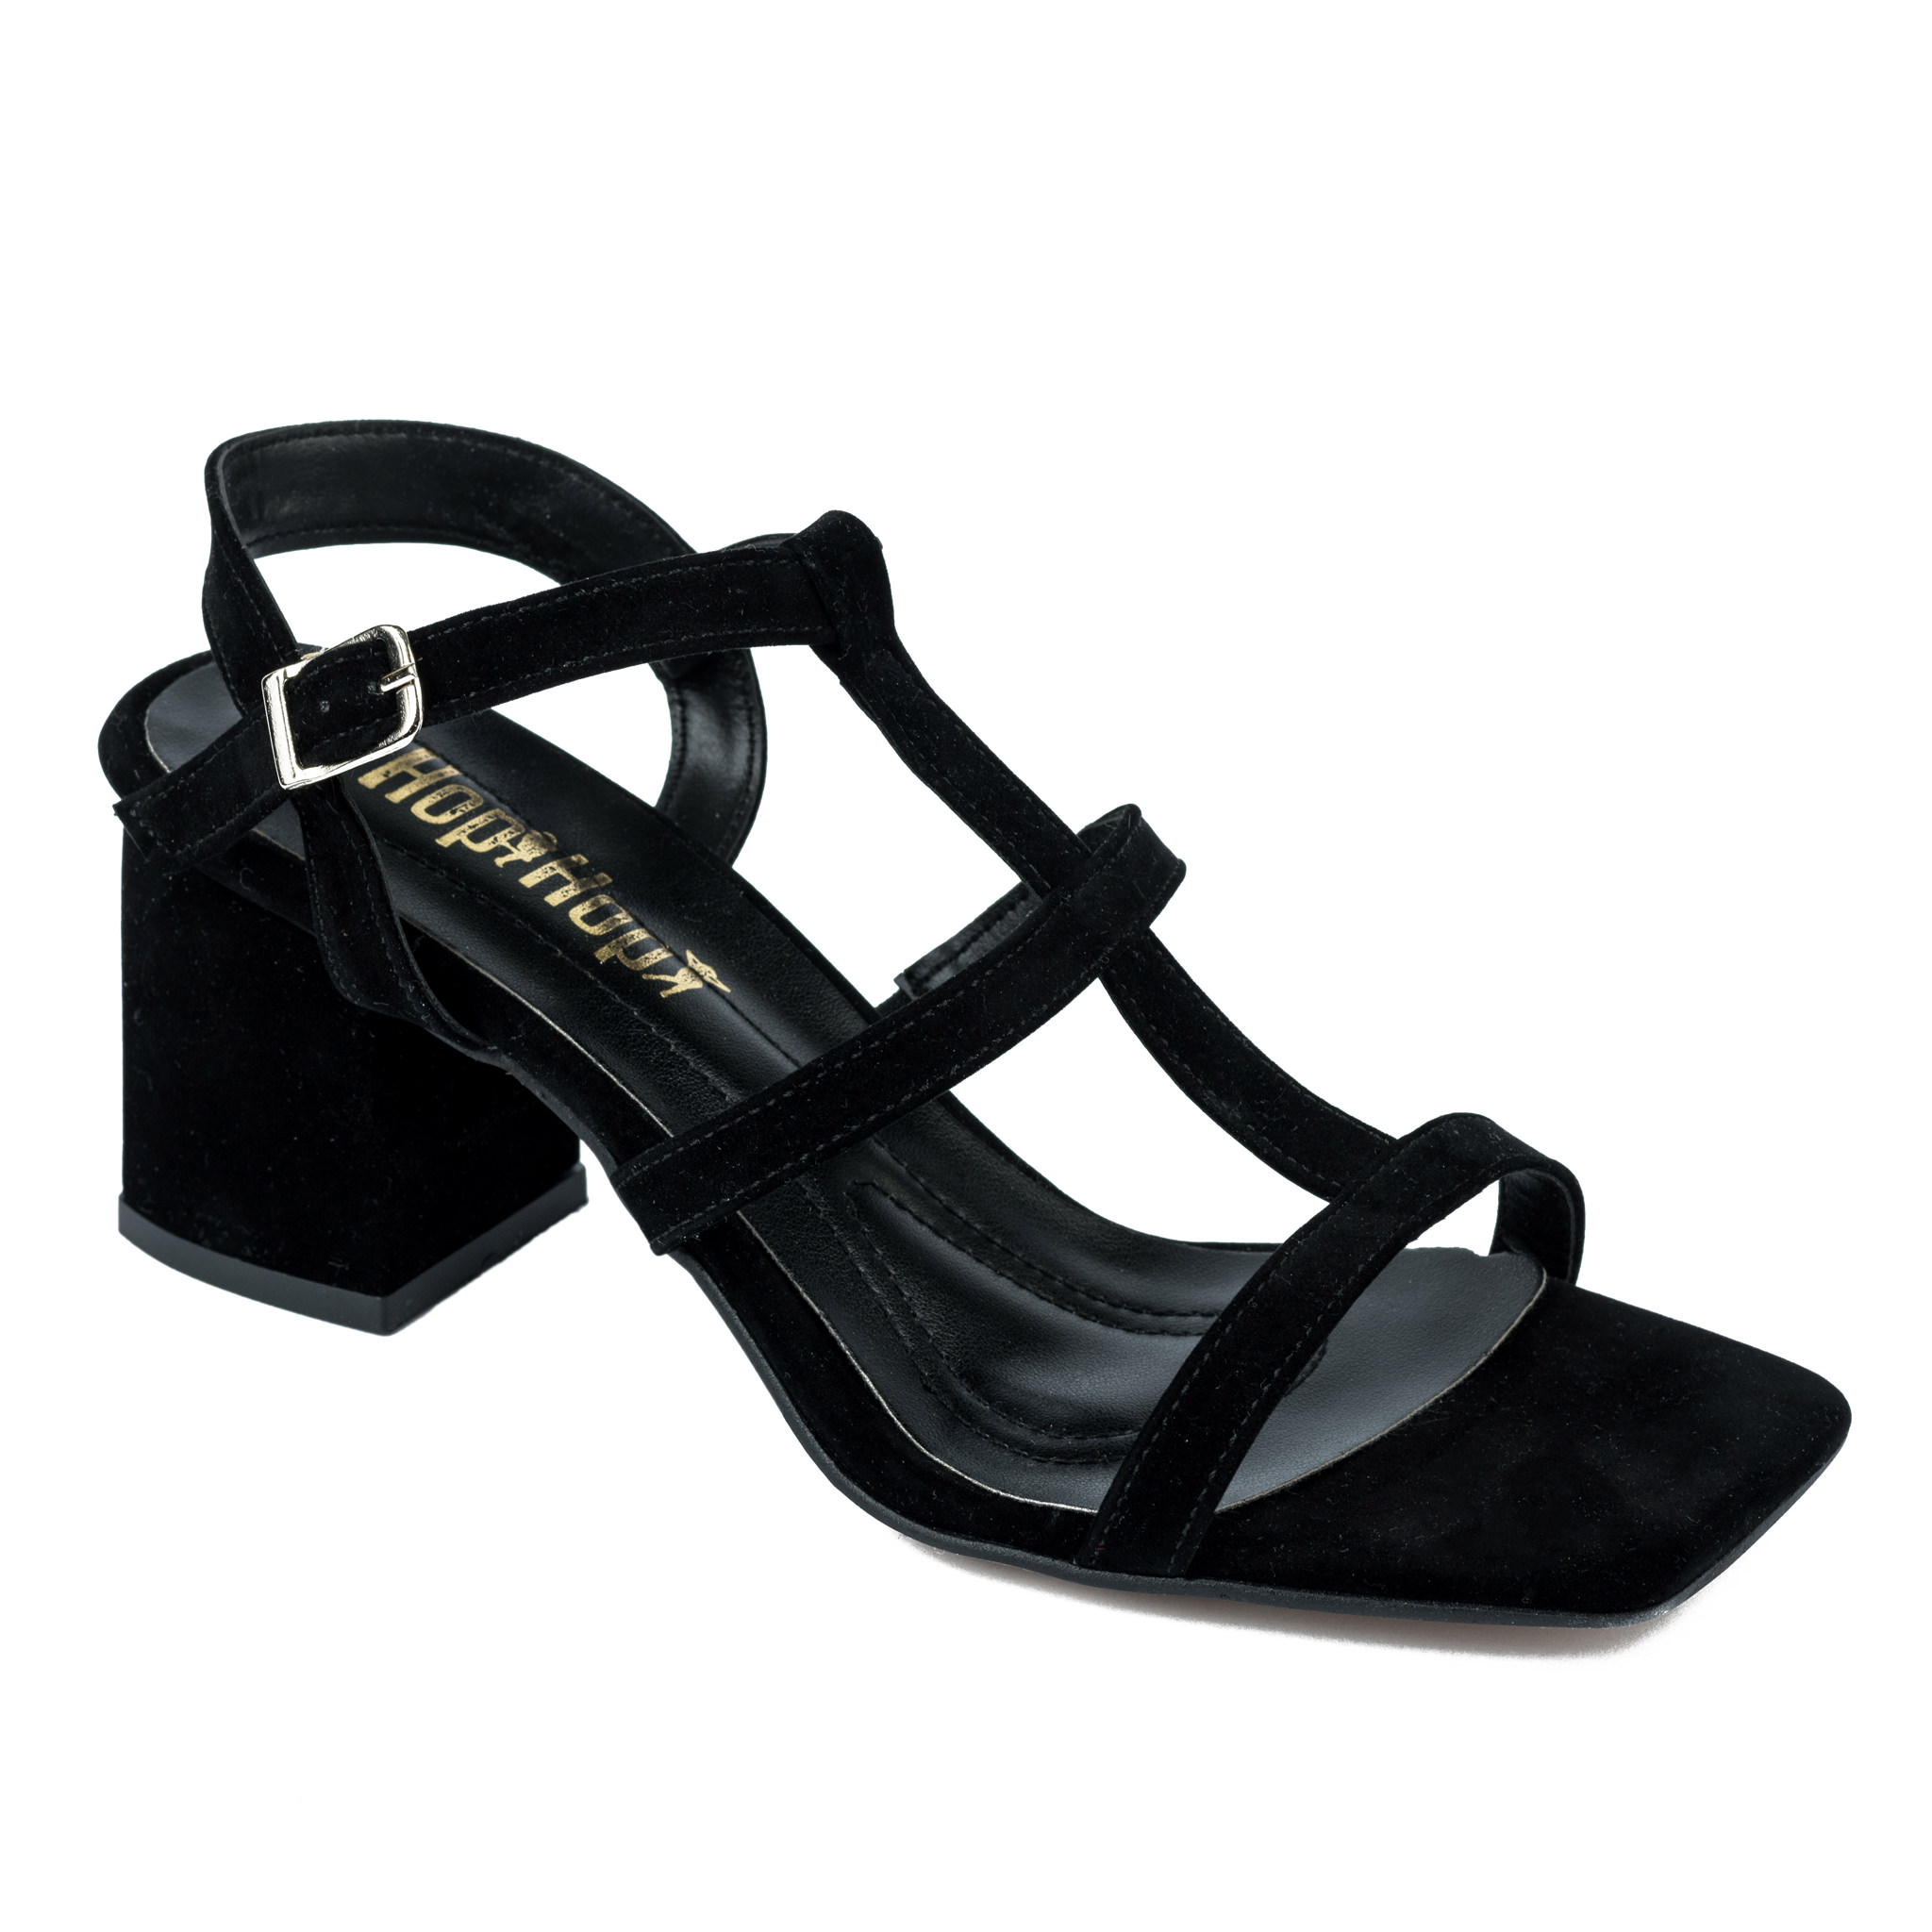 PLUSH SANDALS WITH BELTS AND THICK HEEL - BLACK